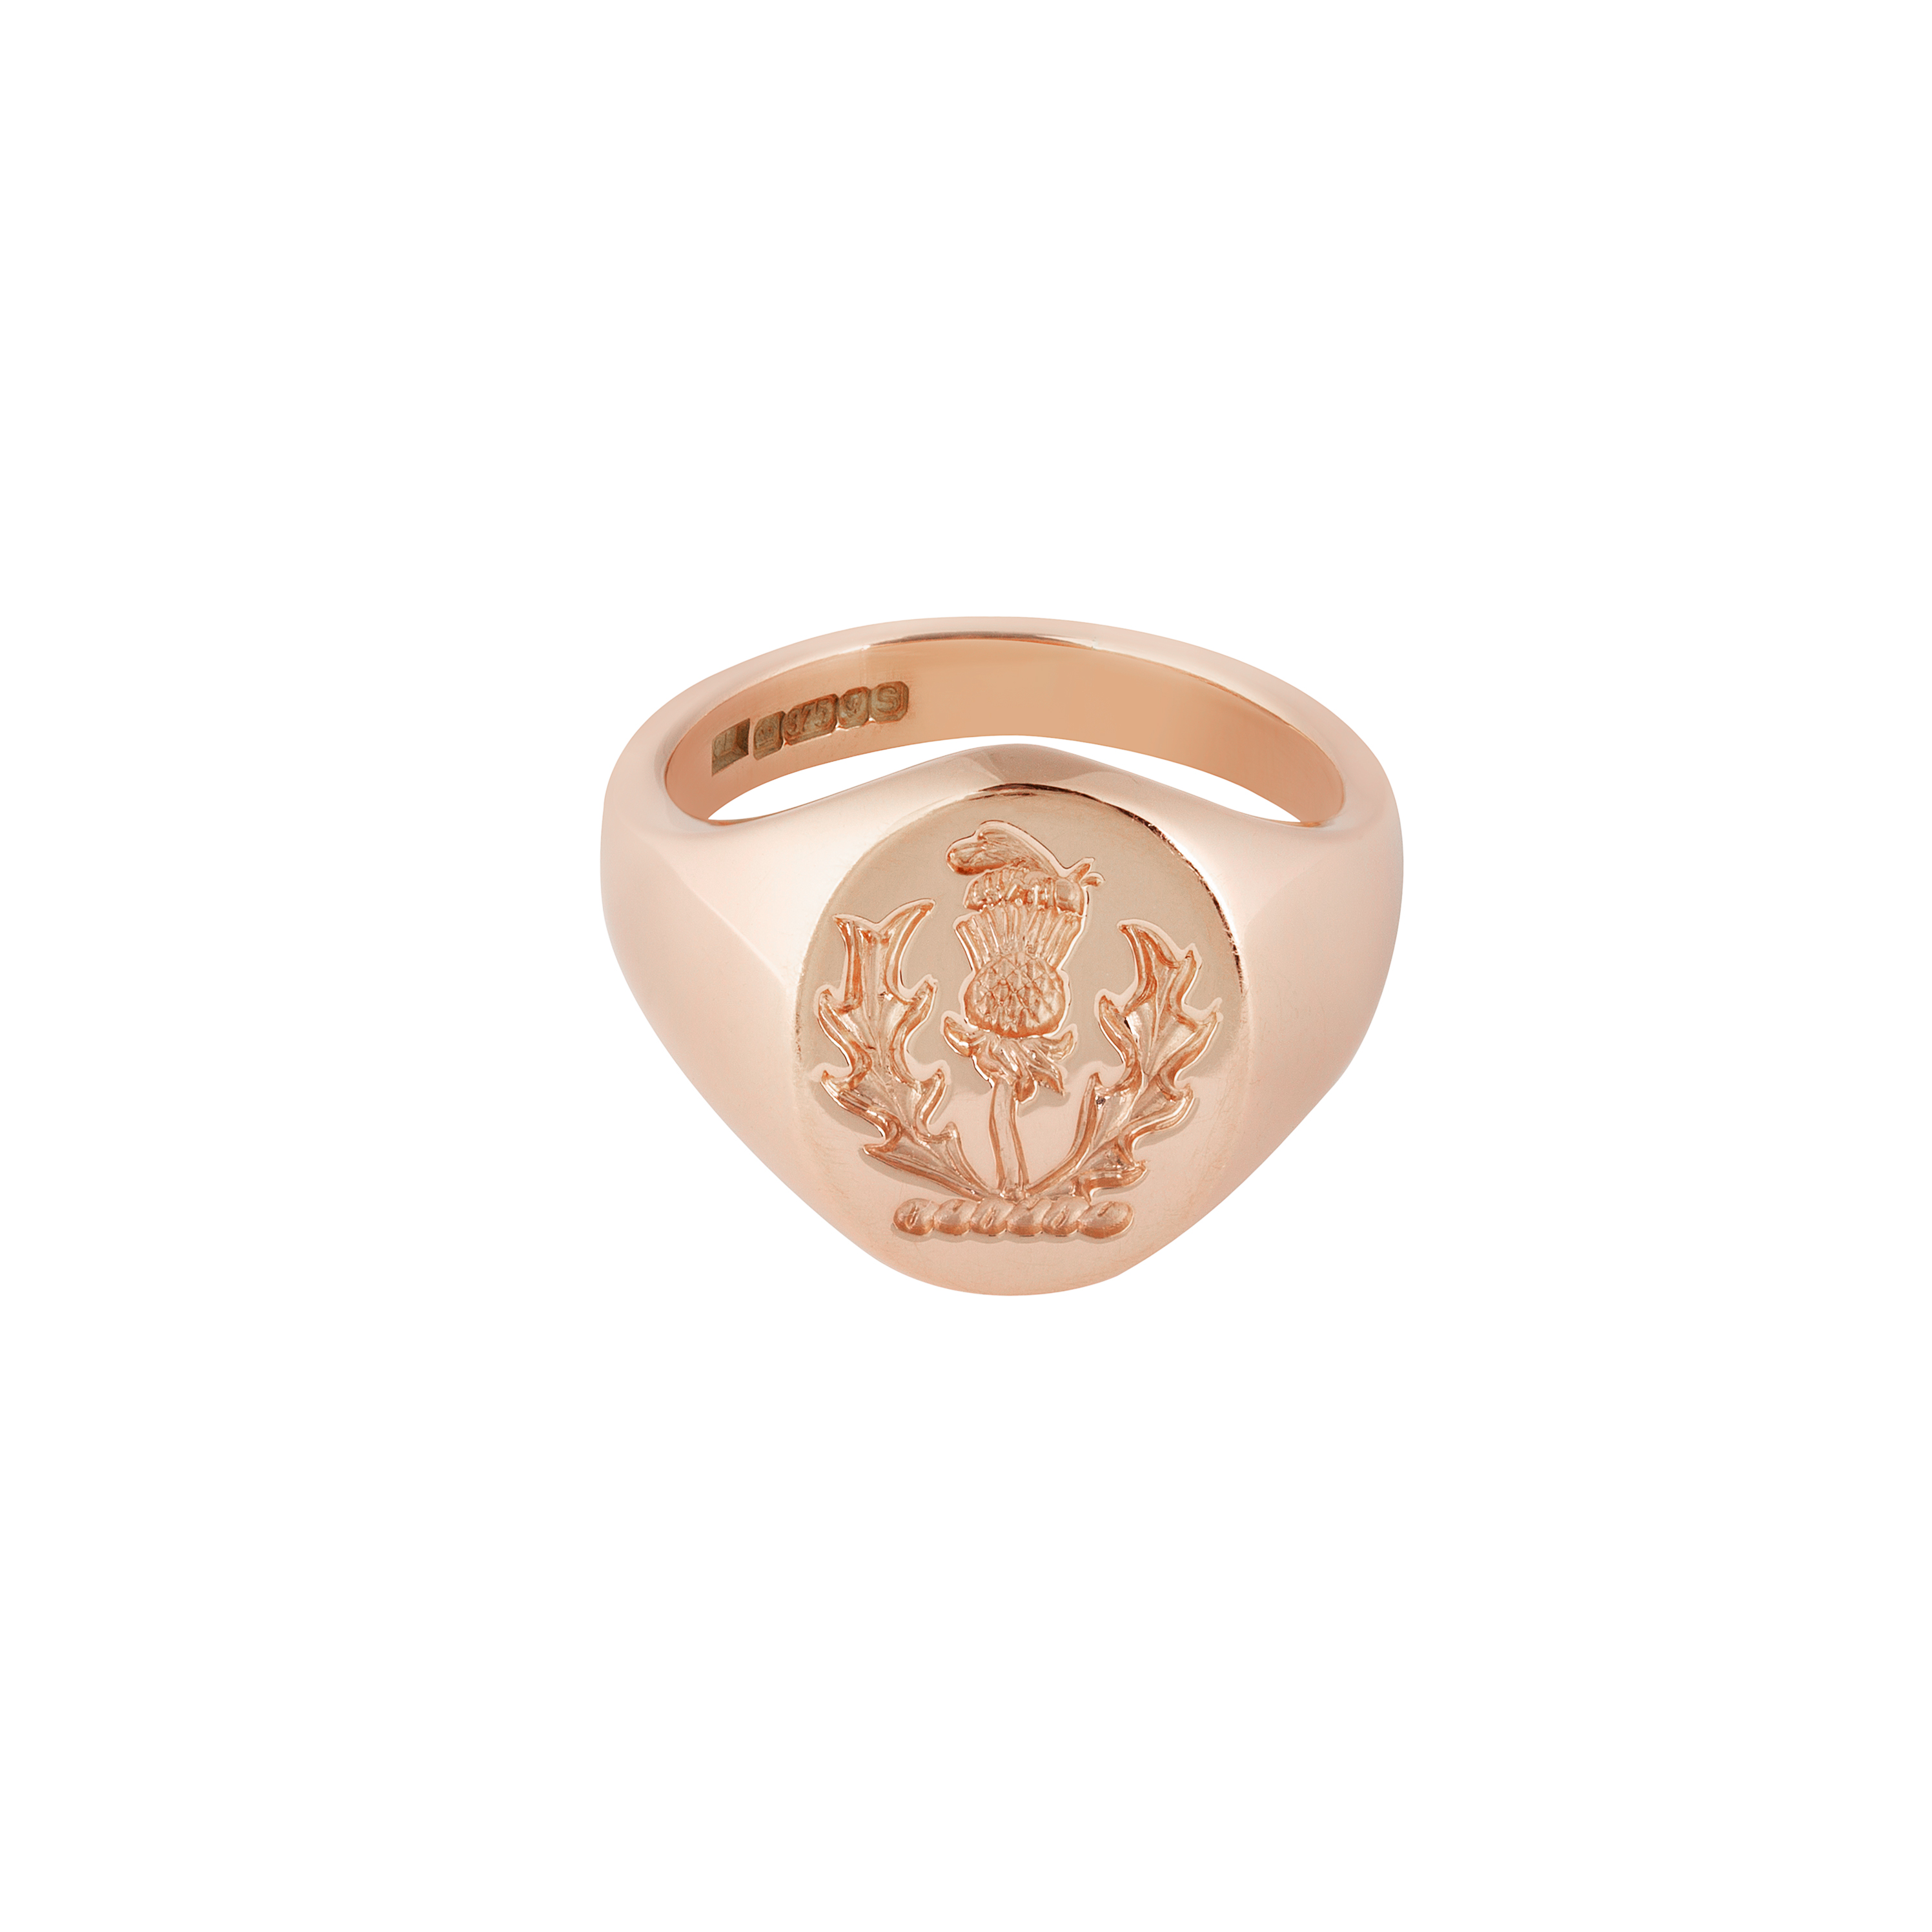 Family Crest Signet Ring HS44 Round 16x16mm, Sterling Silver Laser Engraved  in the UK. Hallmarked, Handmade to Order. Worldwide Shipping. - Etsy